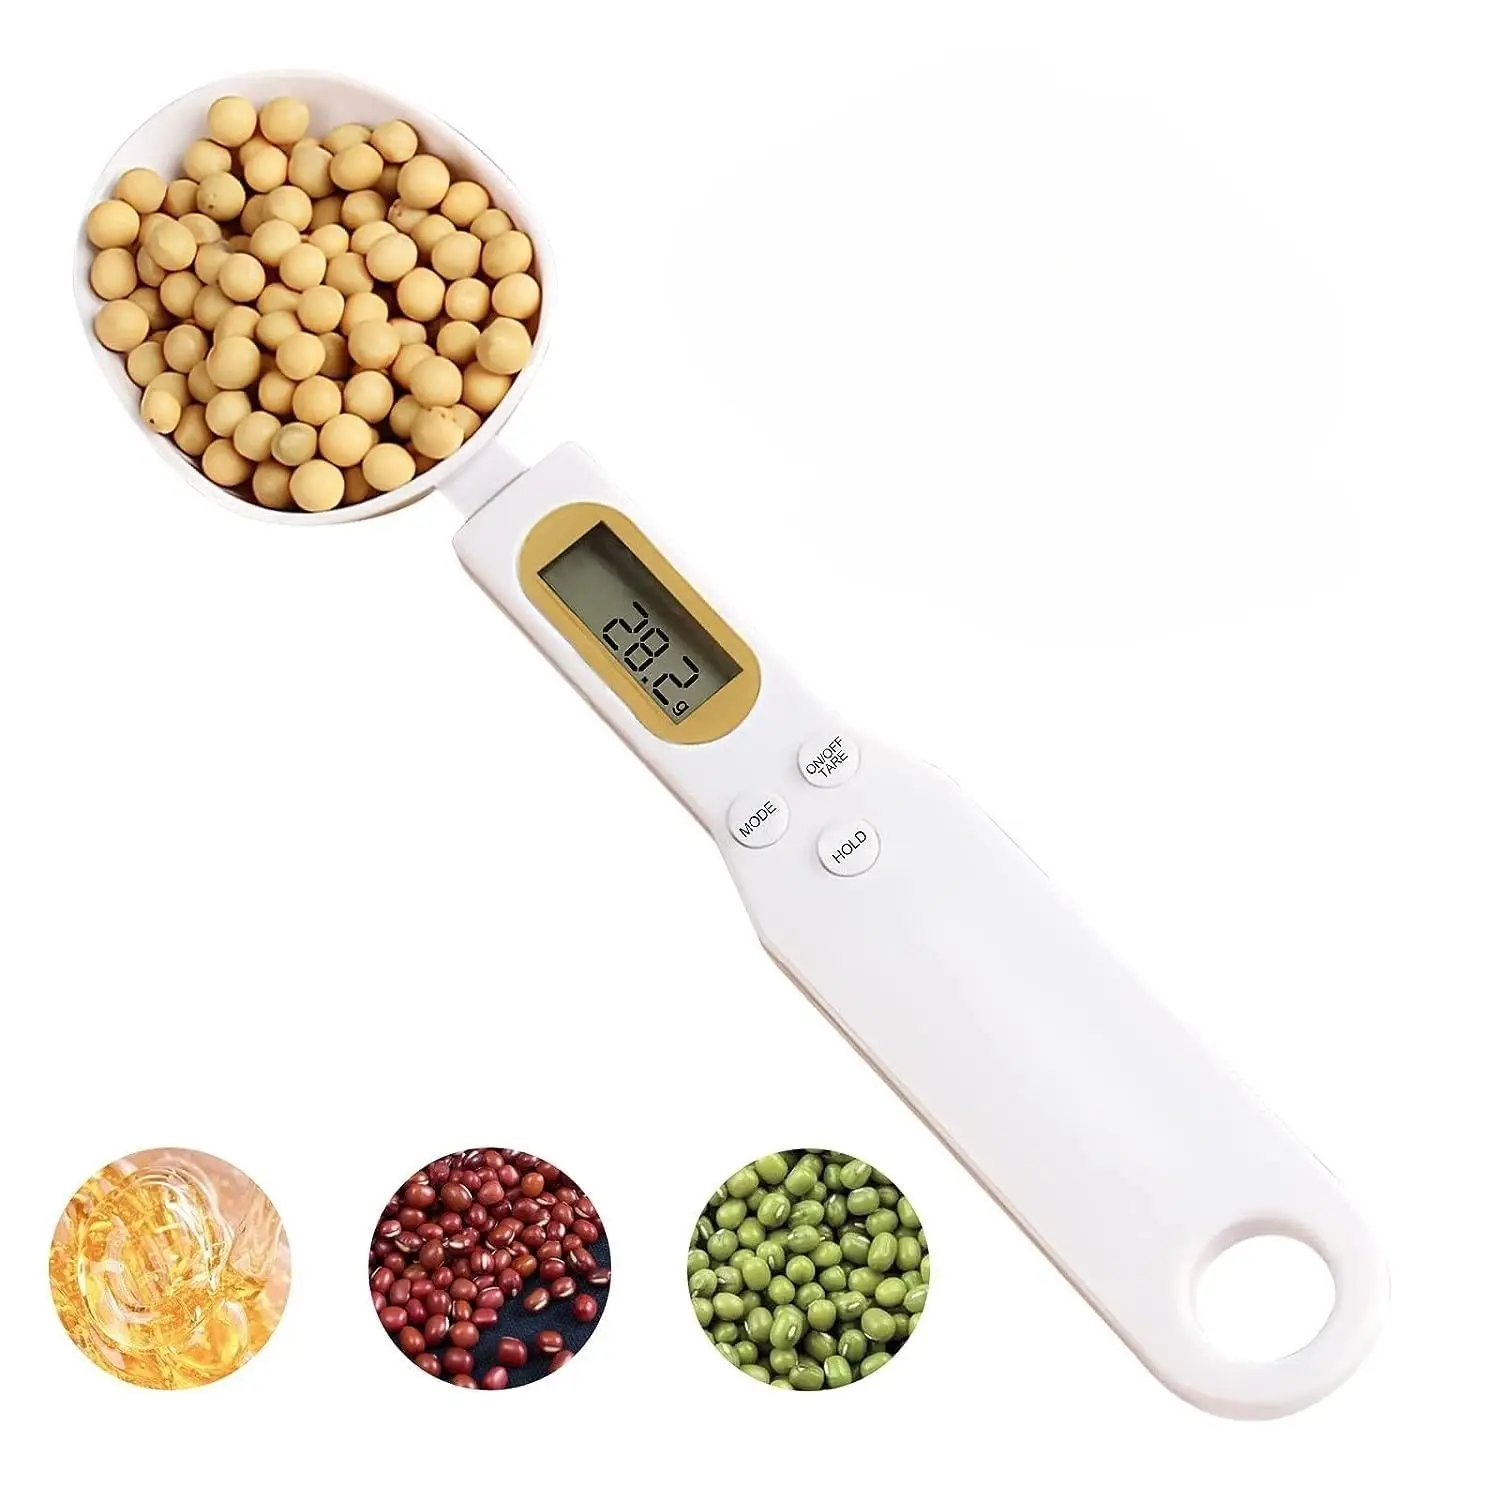 https://ae01.alicdn.com/kf/S44299c97cf99467ea3e491fccdb3294b6/Stainless-Steel-Digital-Kitchen-Scale-500g-0-1g-Measuring-Spoons-Digital-Display-Accurate-Electronic-Measuring-Cup.jpg